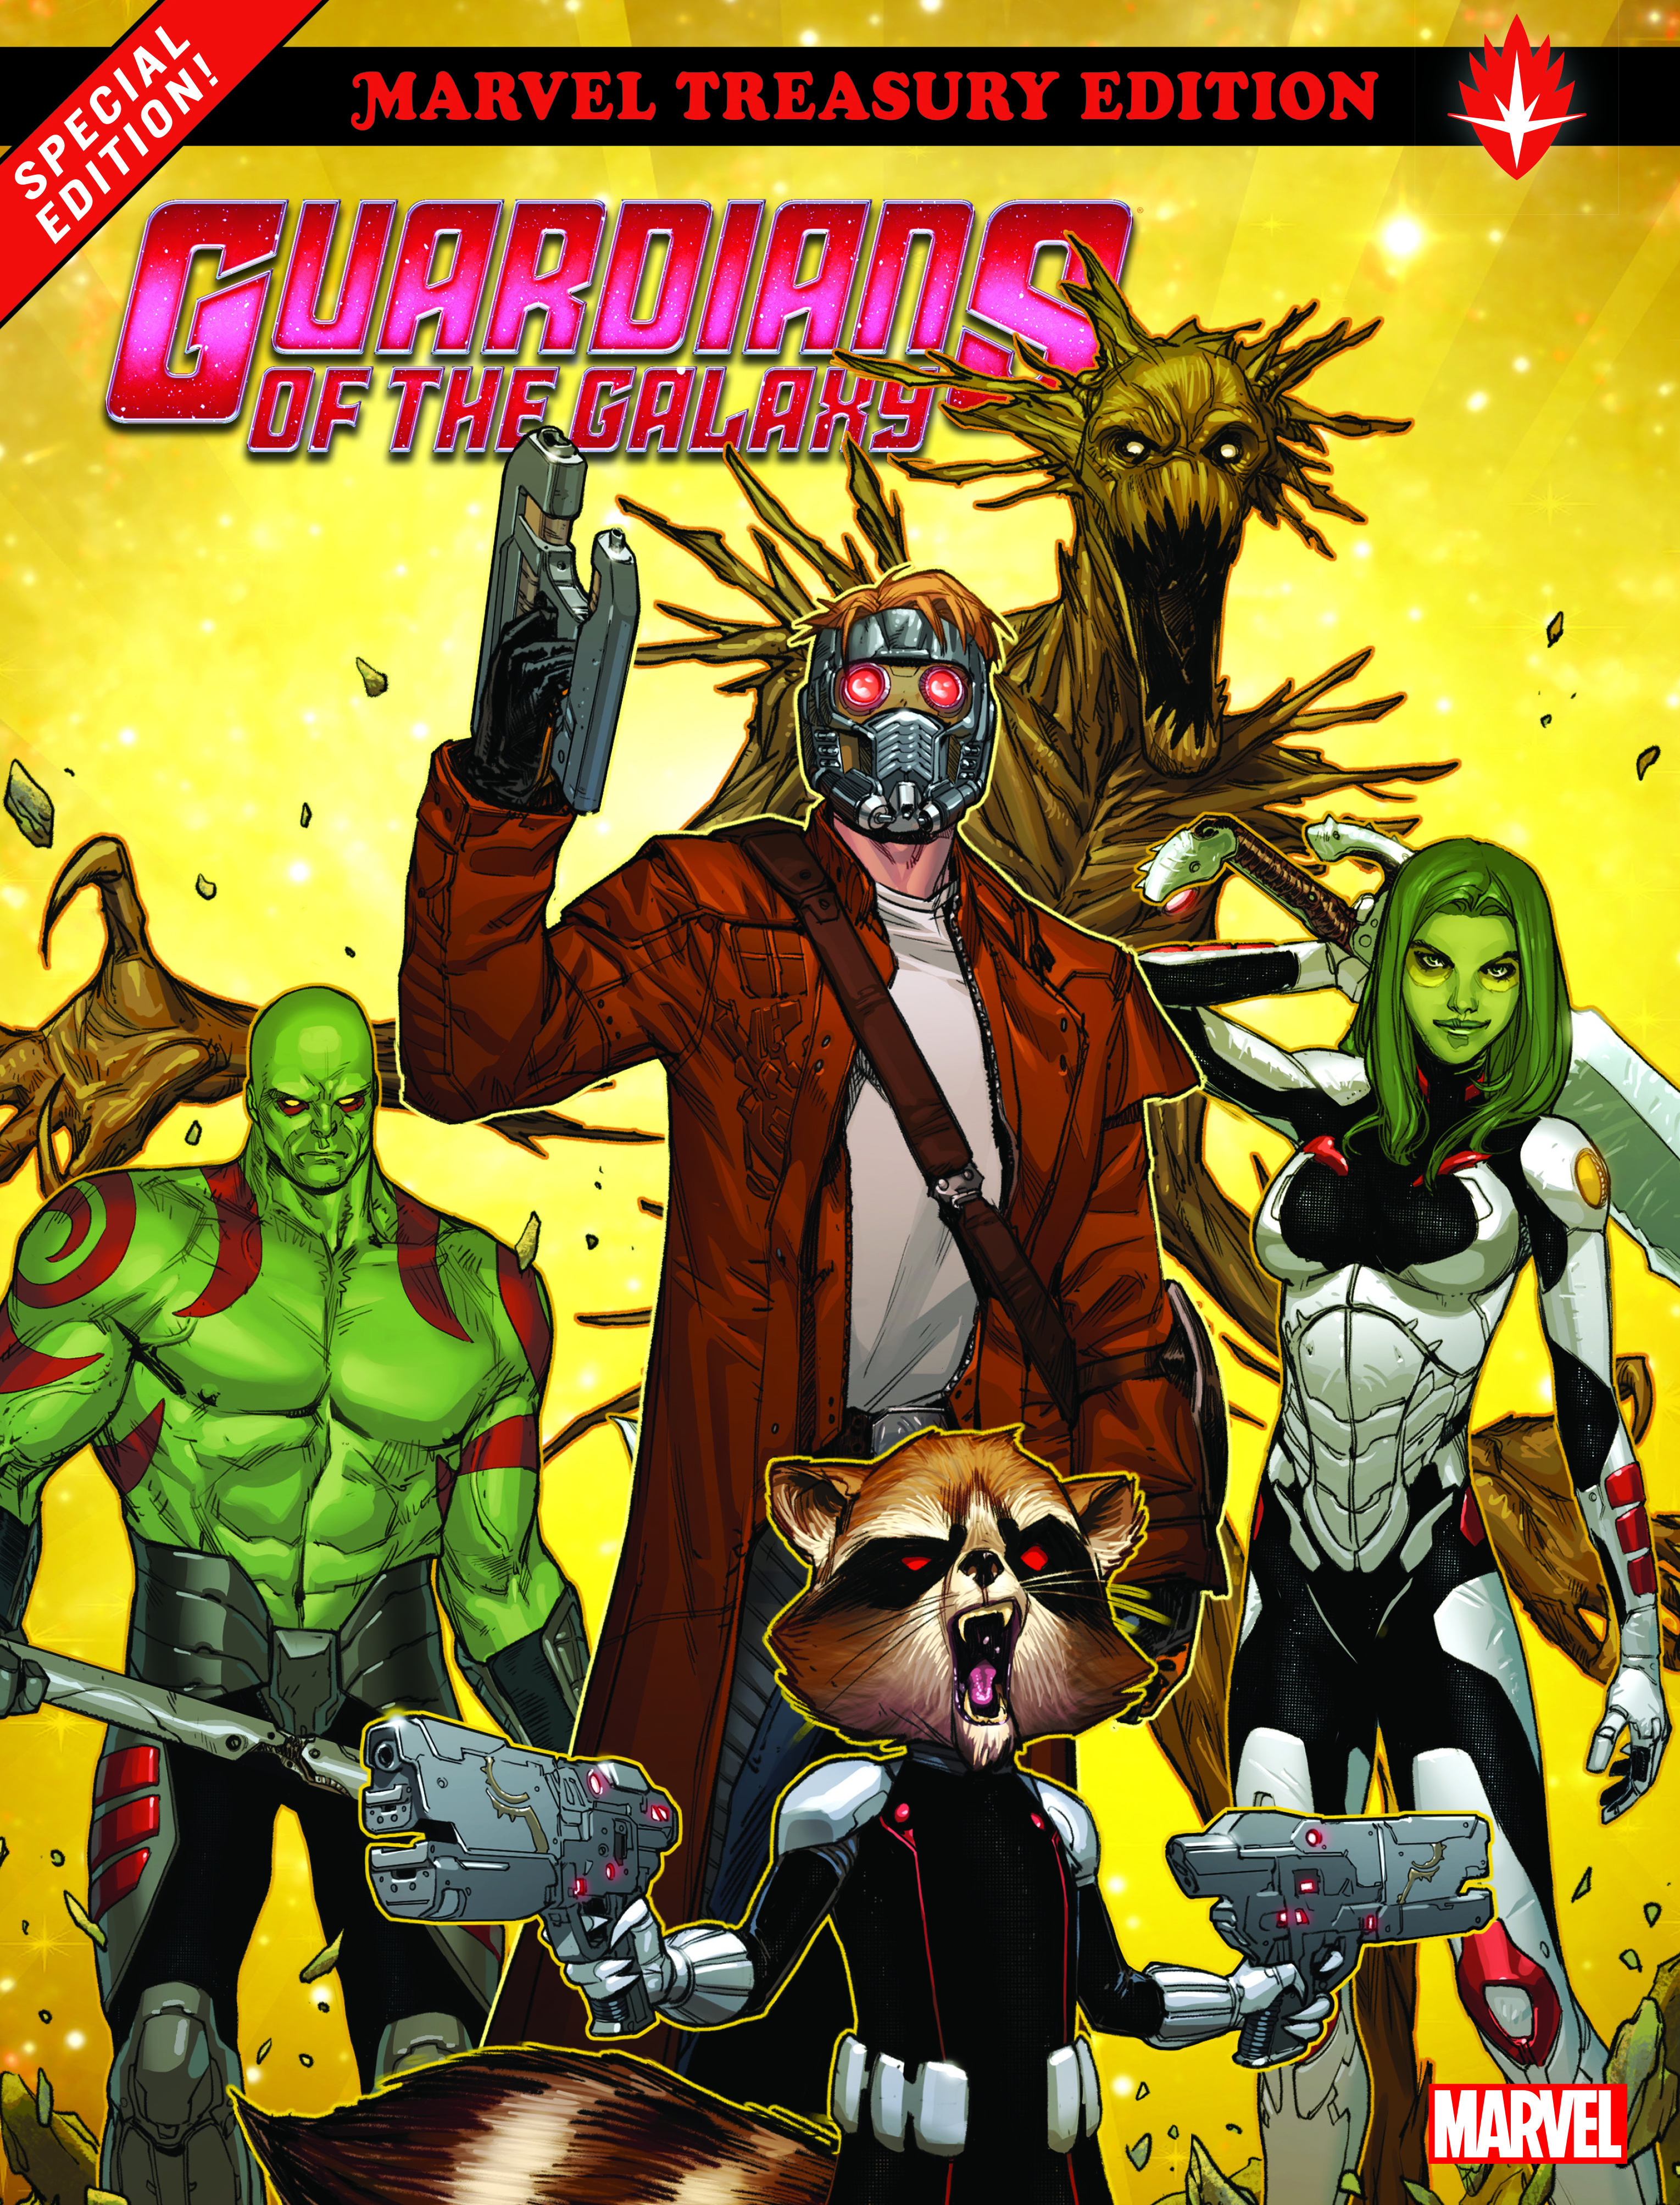 Guardians of The Galaxy: All-New Marvel Treasury Edition (Trade Paperback)